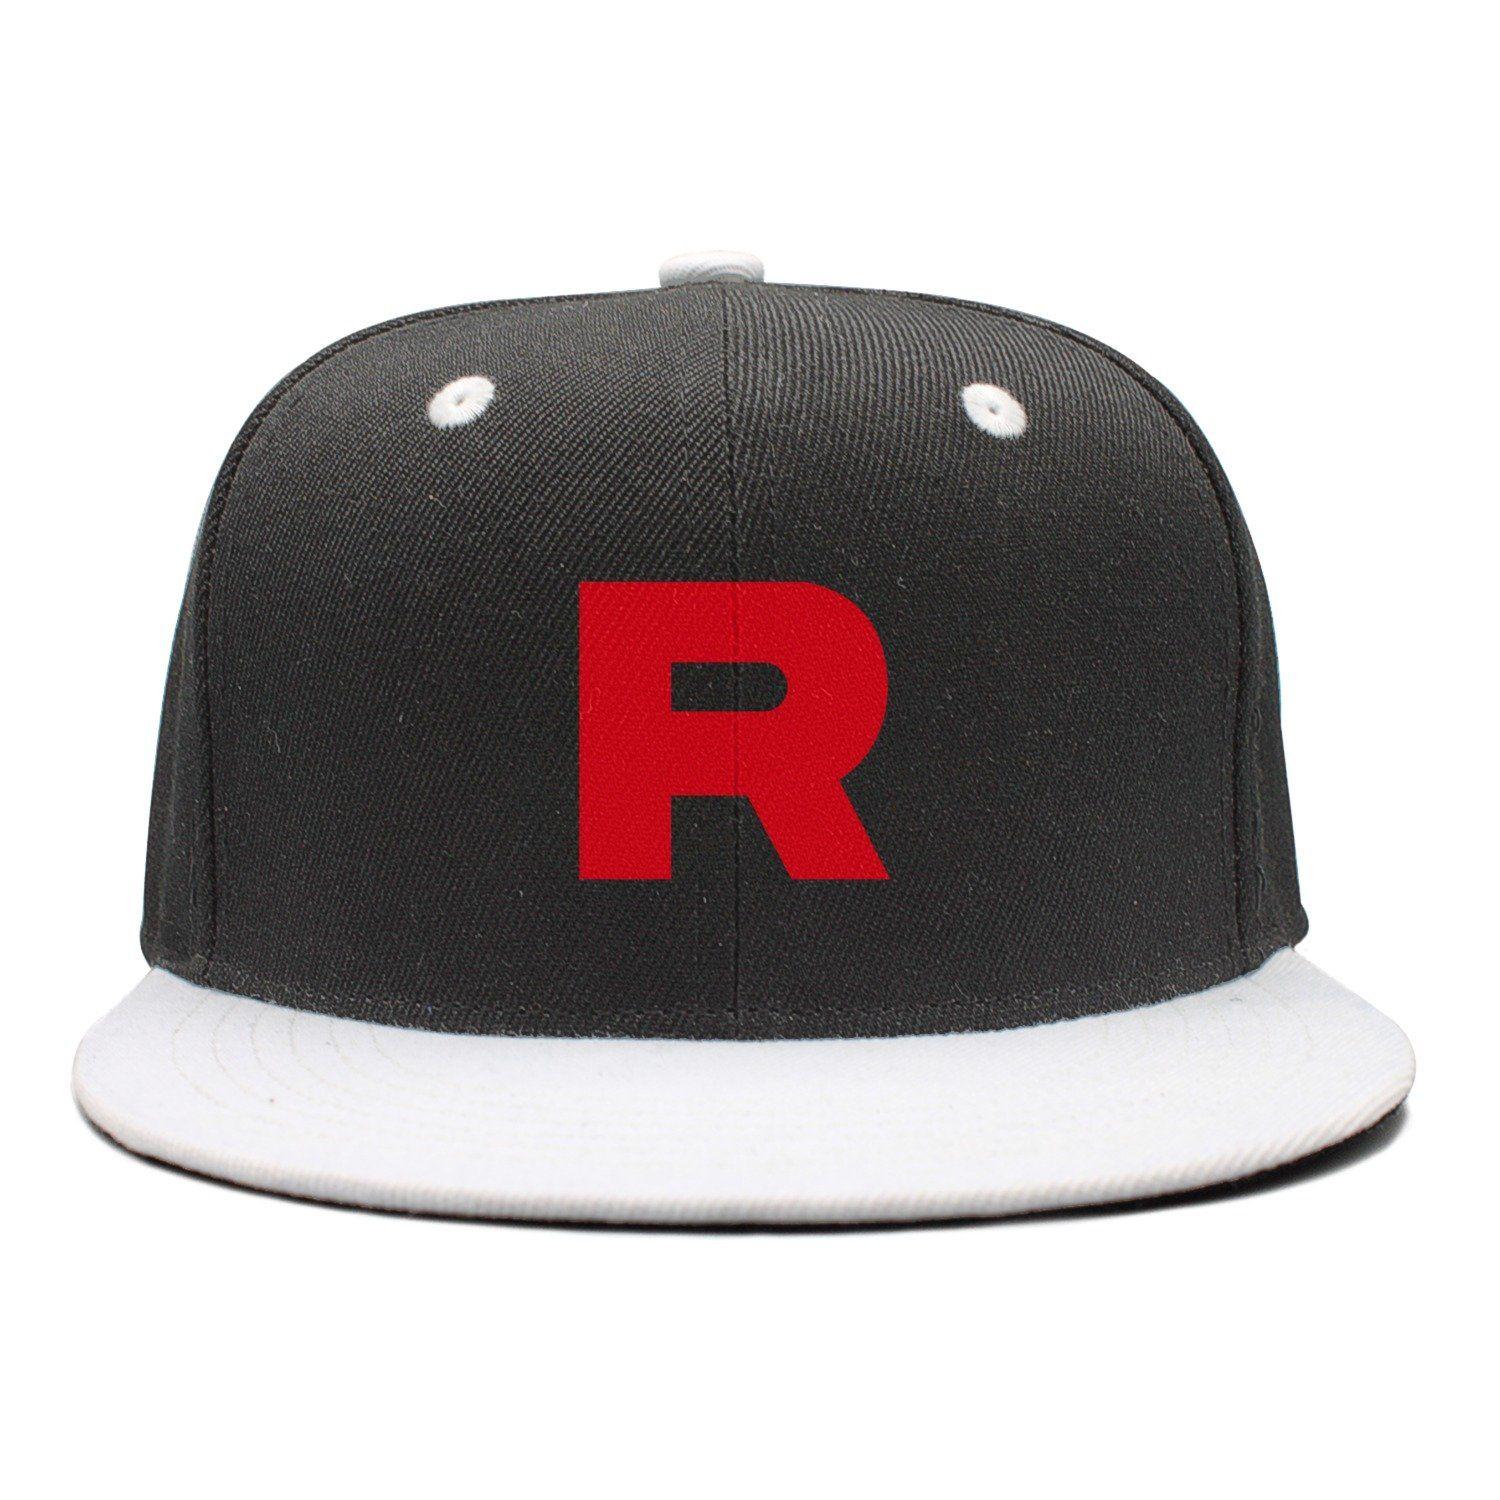 Cool R Logo - XCVJOIWERNM Team R Logo Fitted Flat Snapback Hats Blue at Amazon